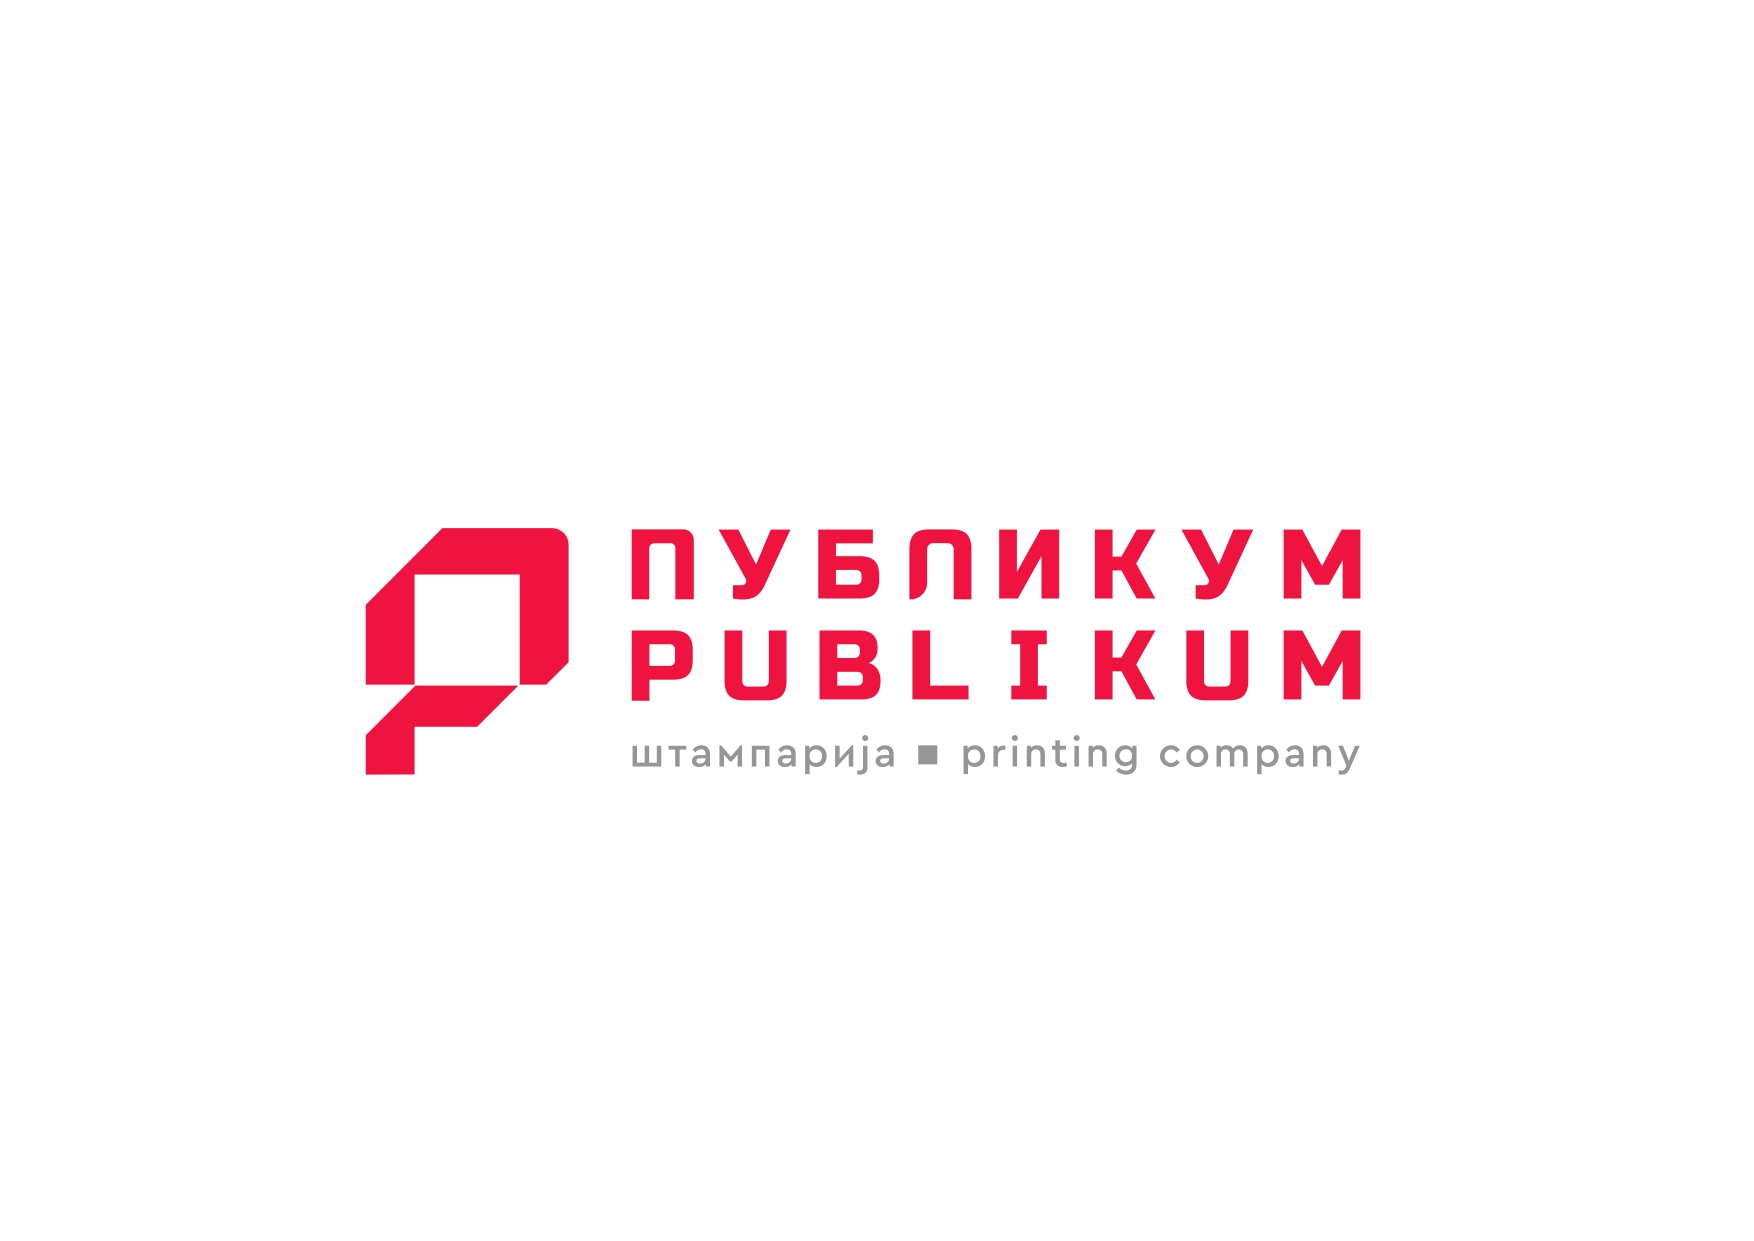 Welcome our newest member Publikum